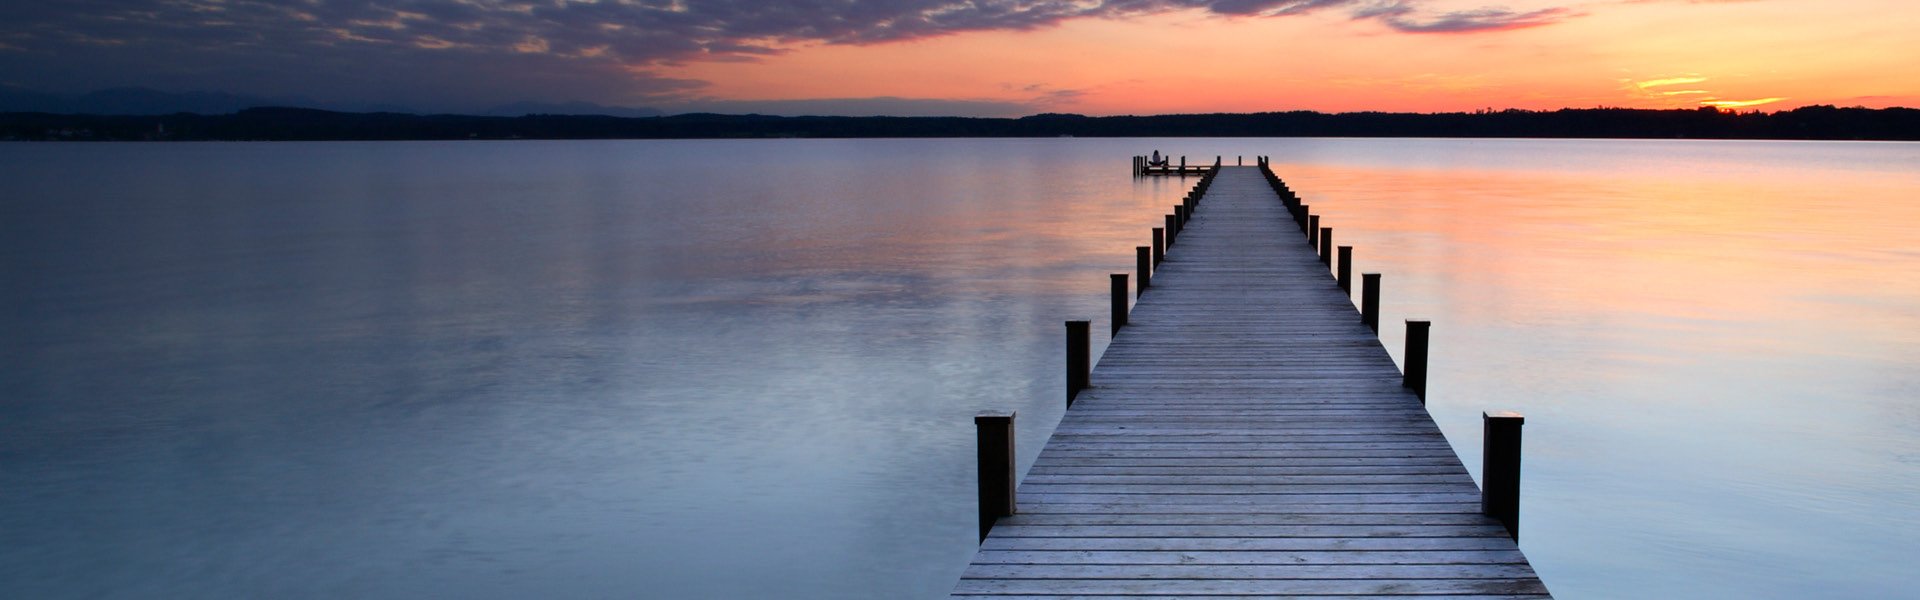 Pier on the lake at sunset